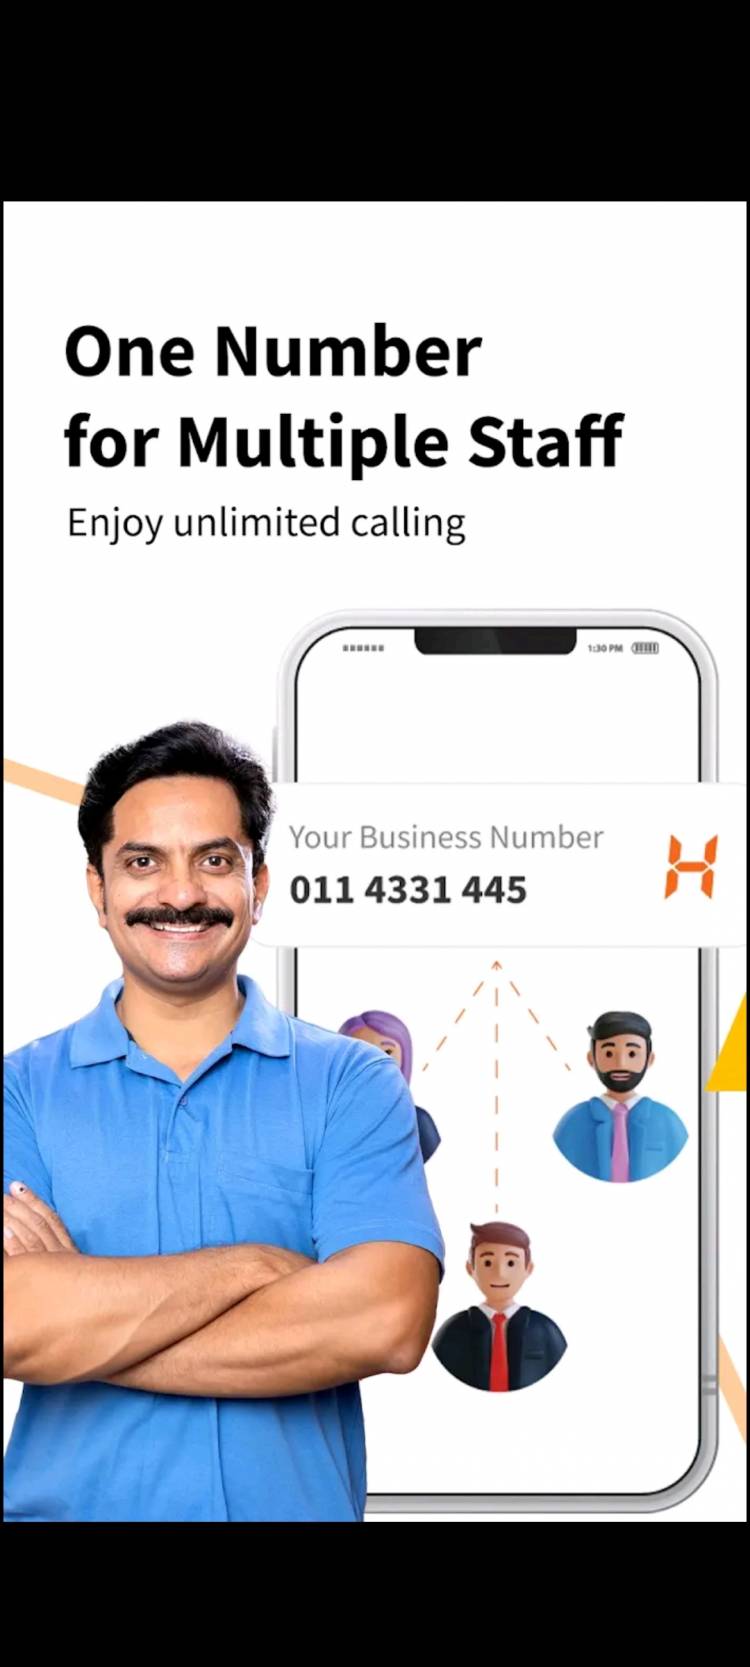 India’s Leading Cloud Communication Platform MyOperator Launches Heyo, The Smart Business Number for 65 Million+ Small and Medium Business